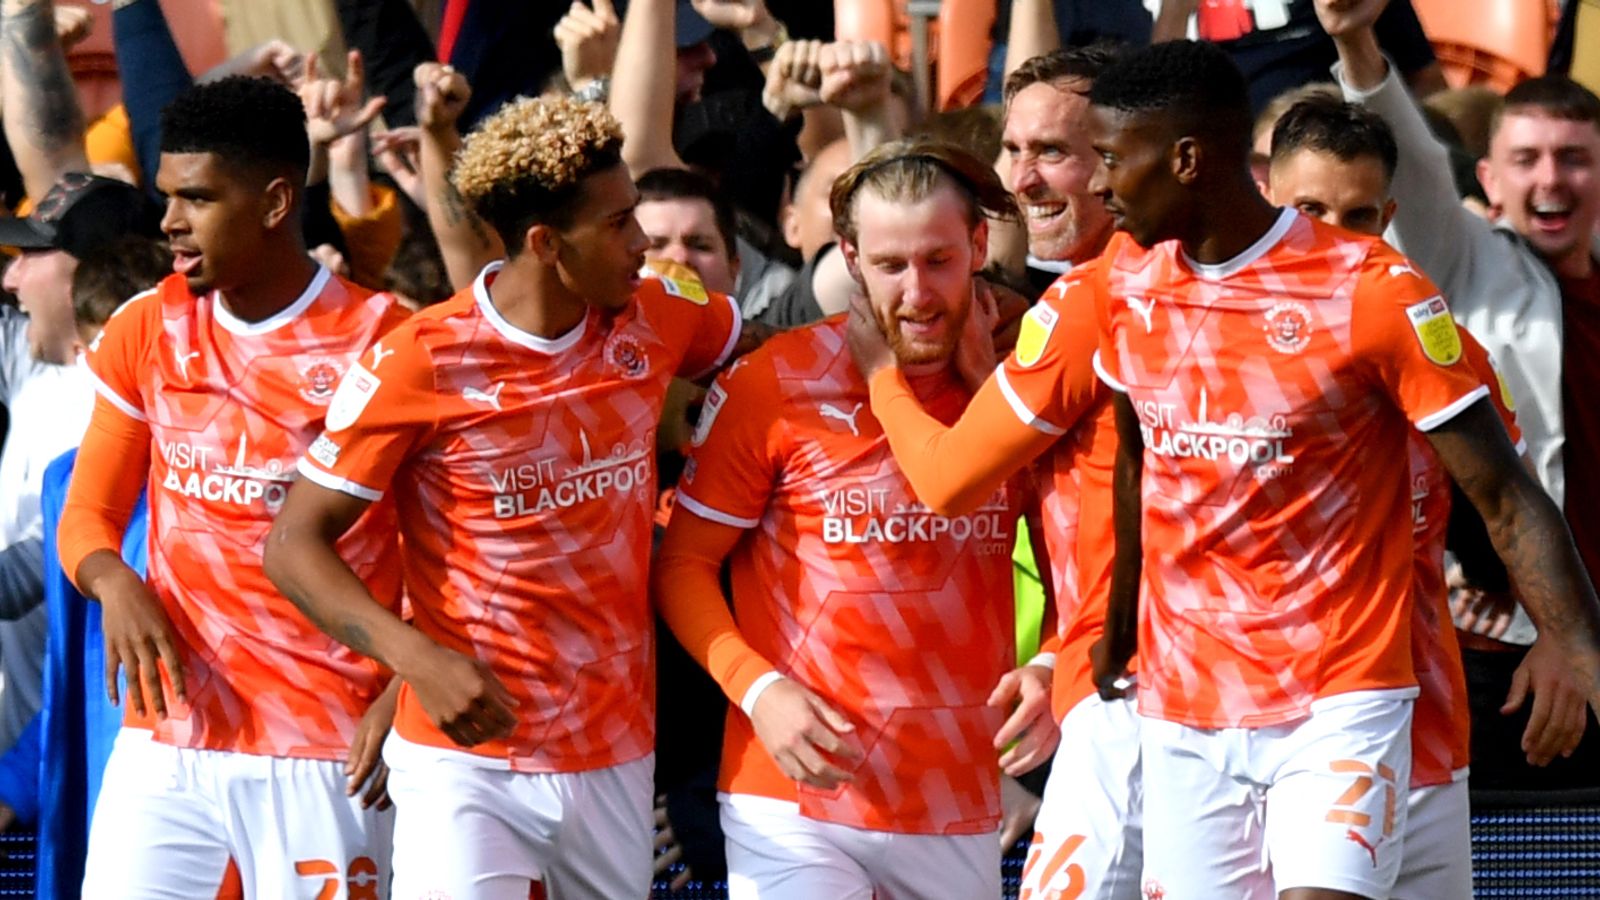 13-facts-about-blackpool